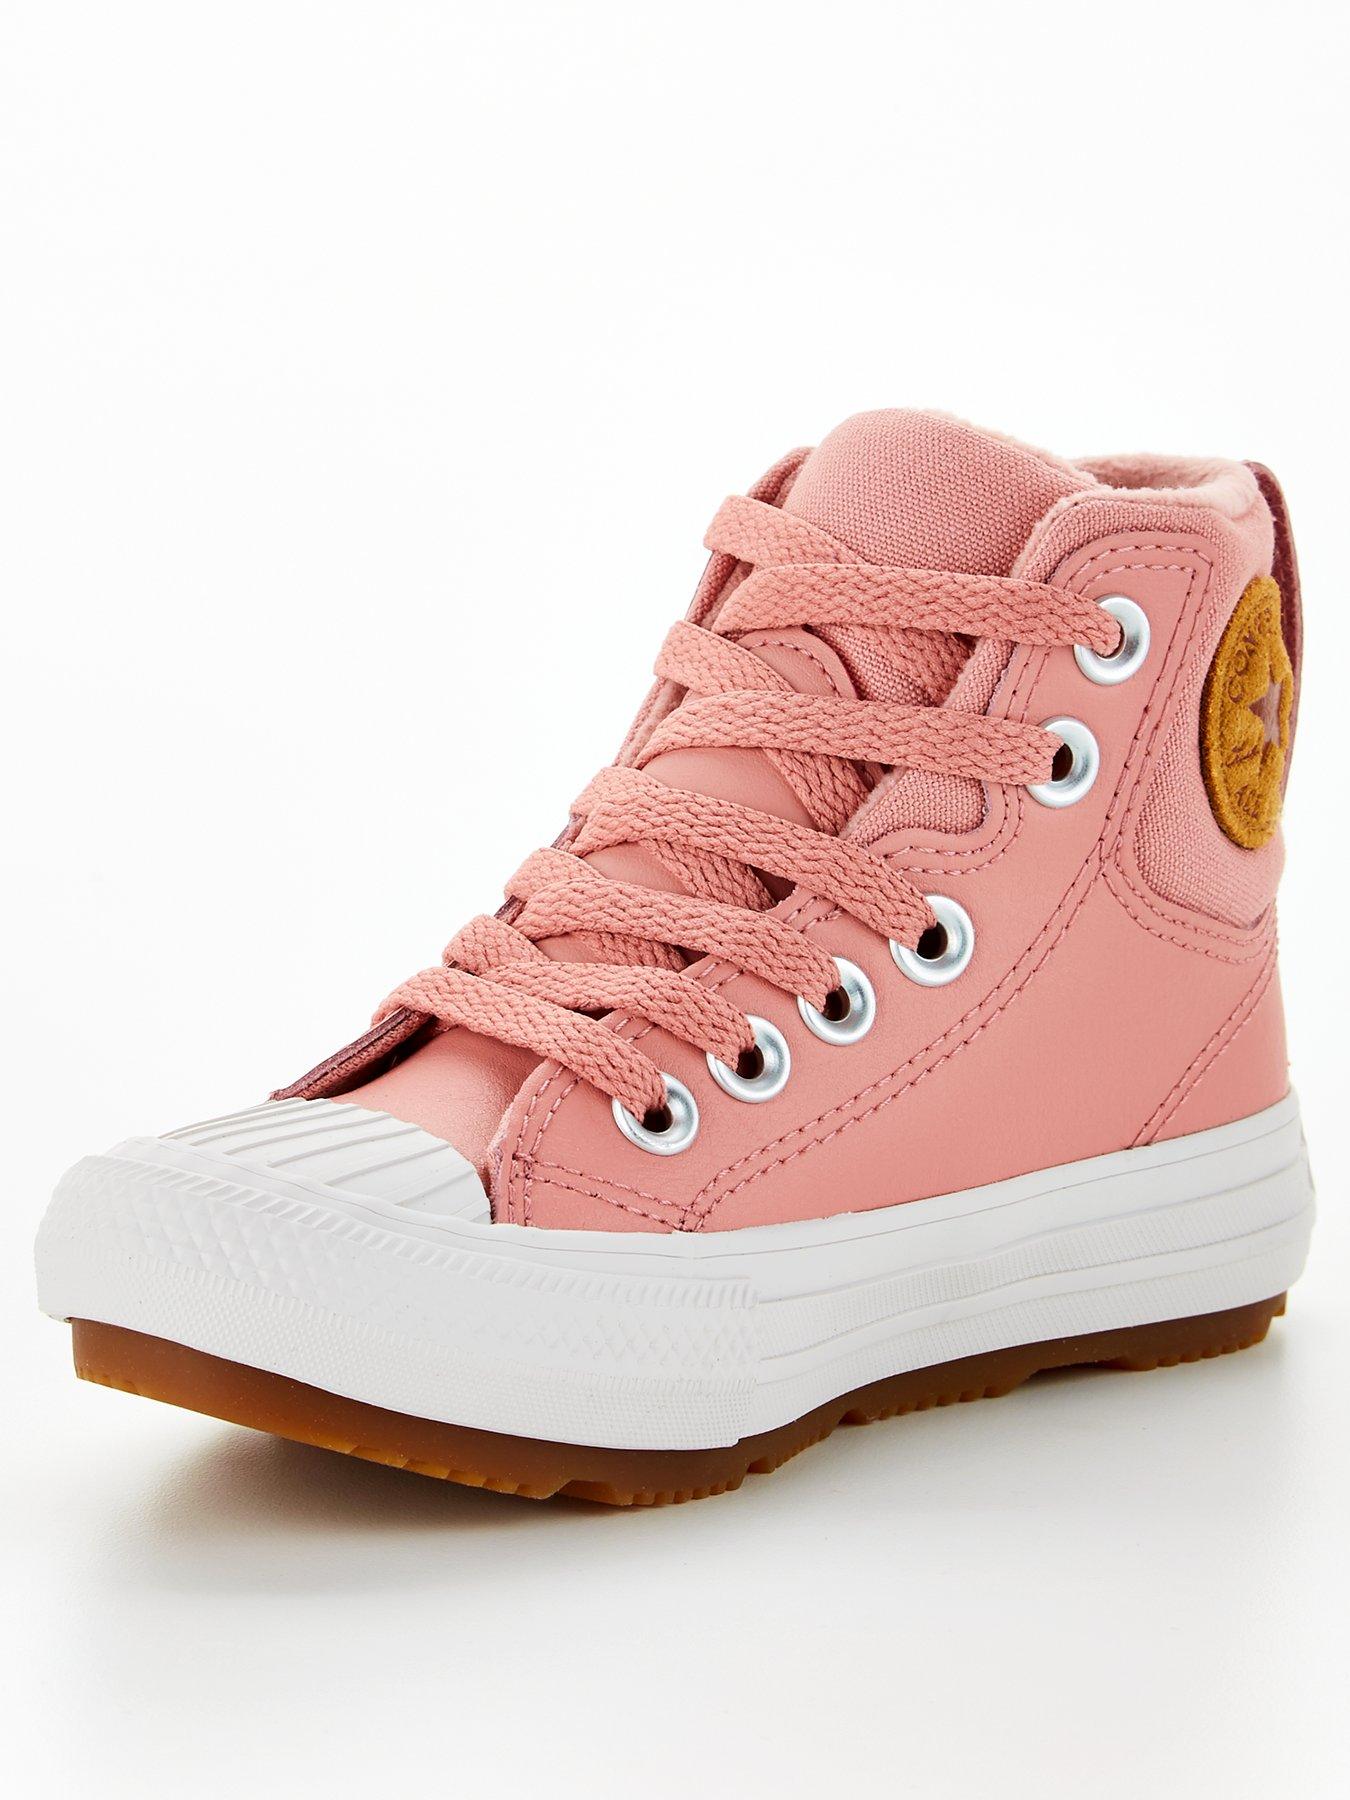 childrens converse boots